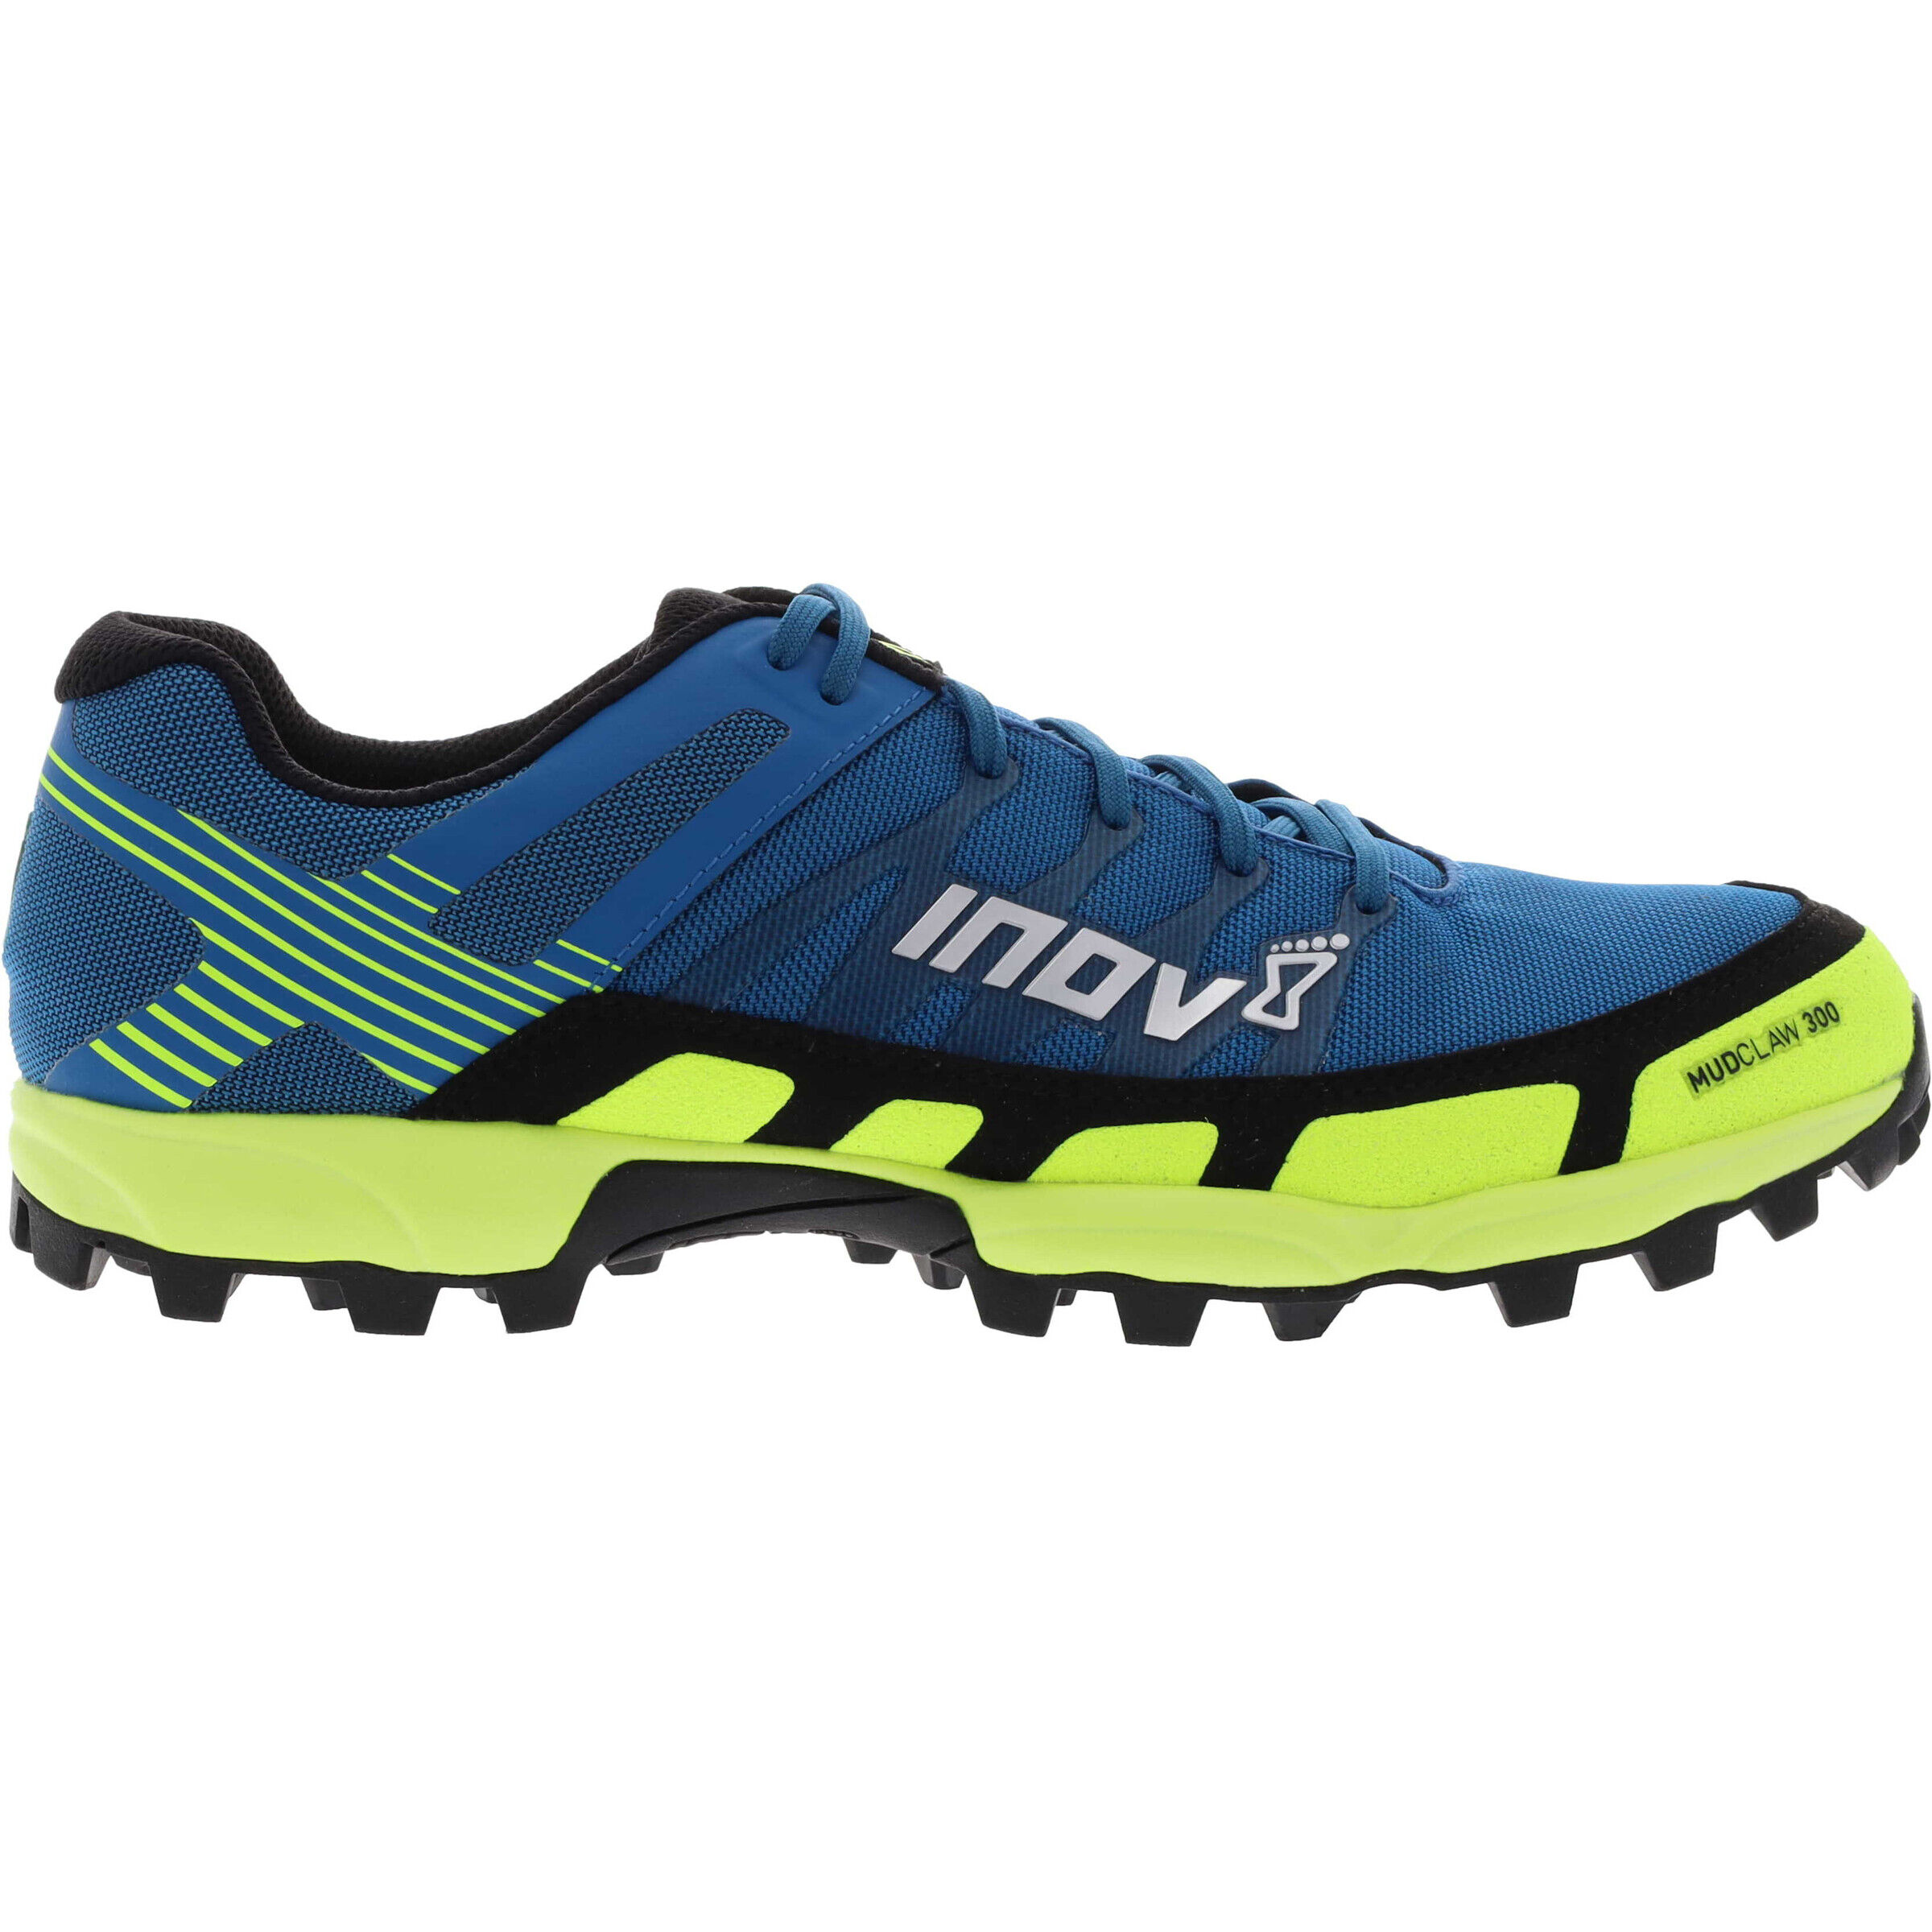 Inov-8 Mudclaw 300 - Trail running shoes - Women's